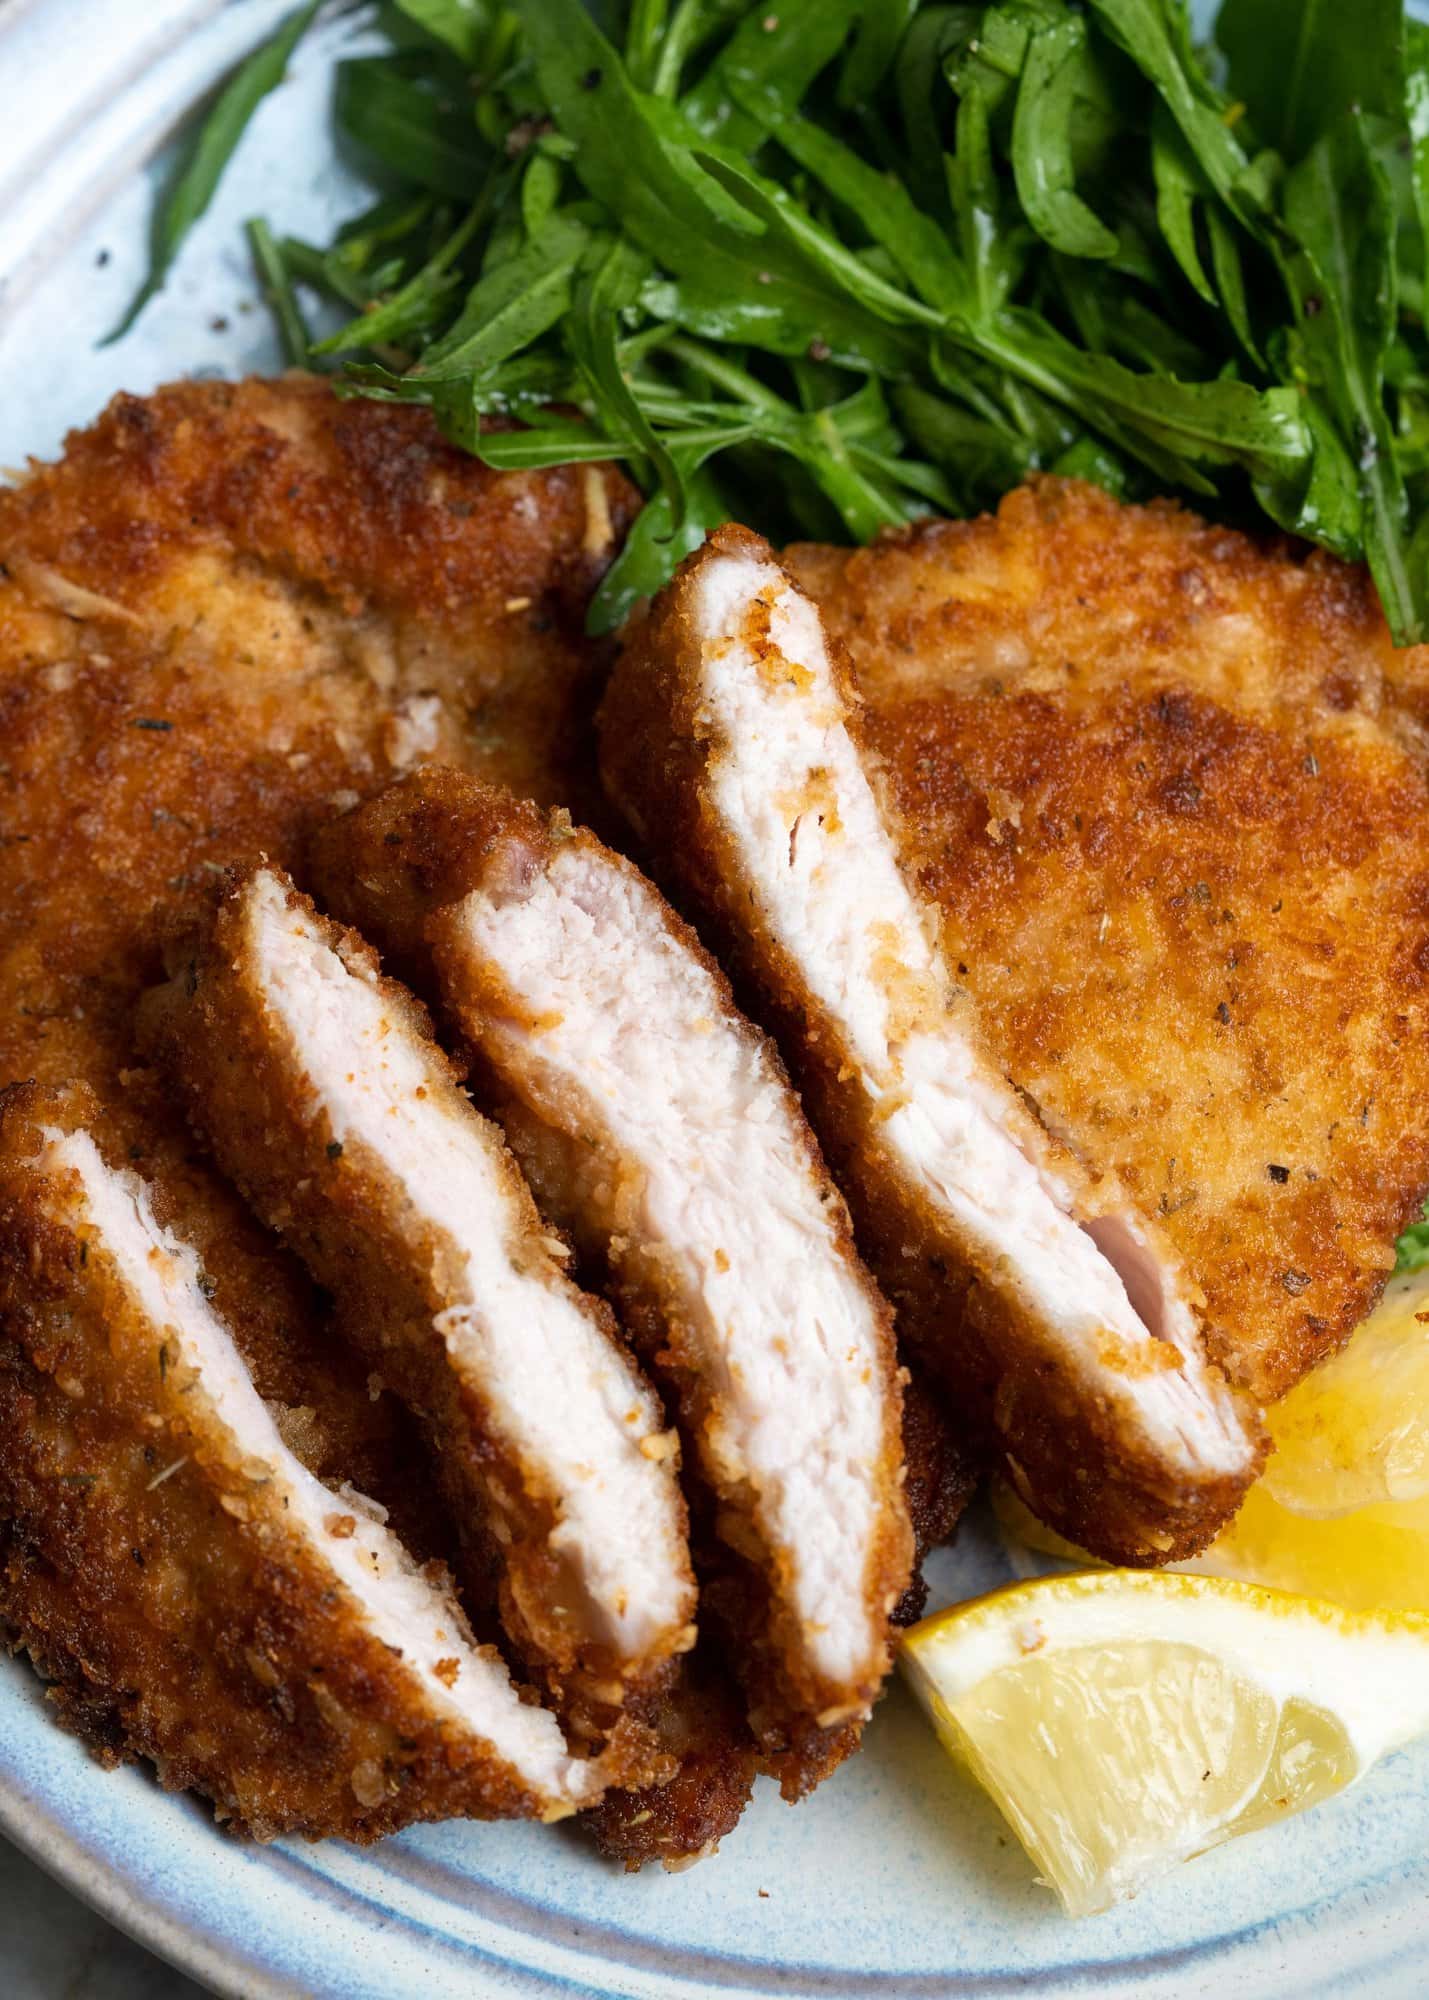 Chicken cutlet cut to show juicy chicken inside a crispy outer coating and served on a